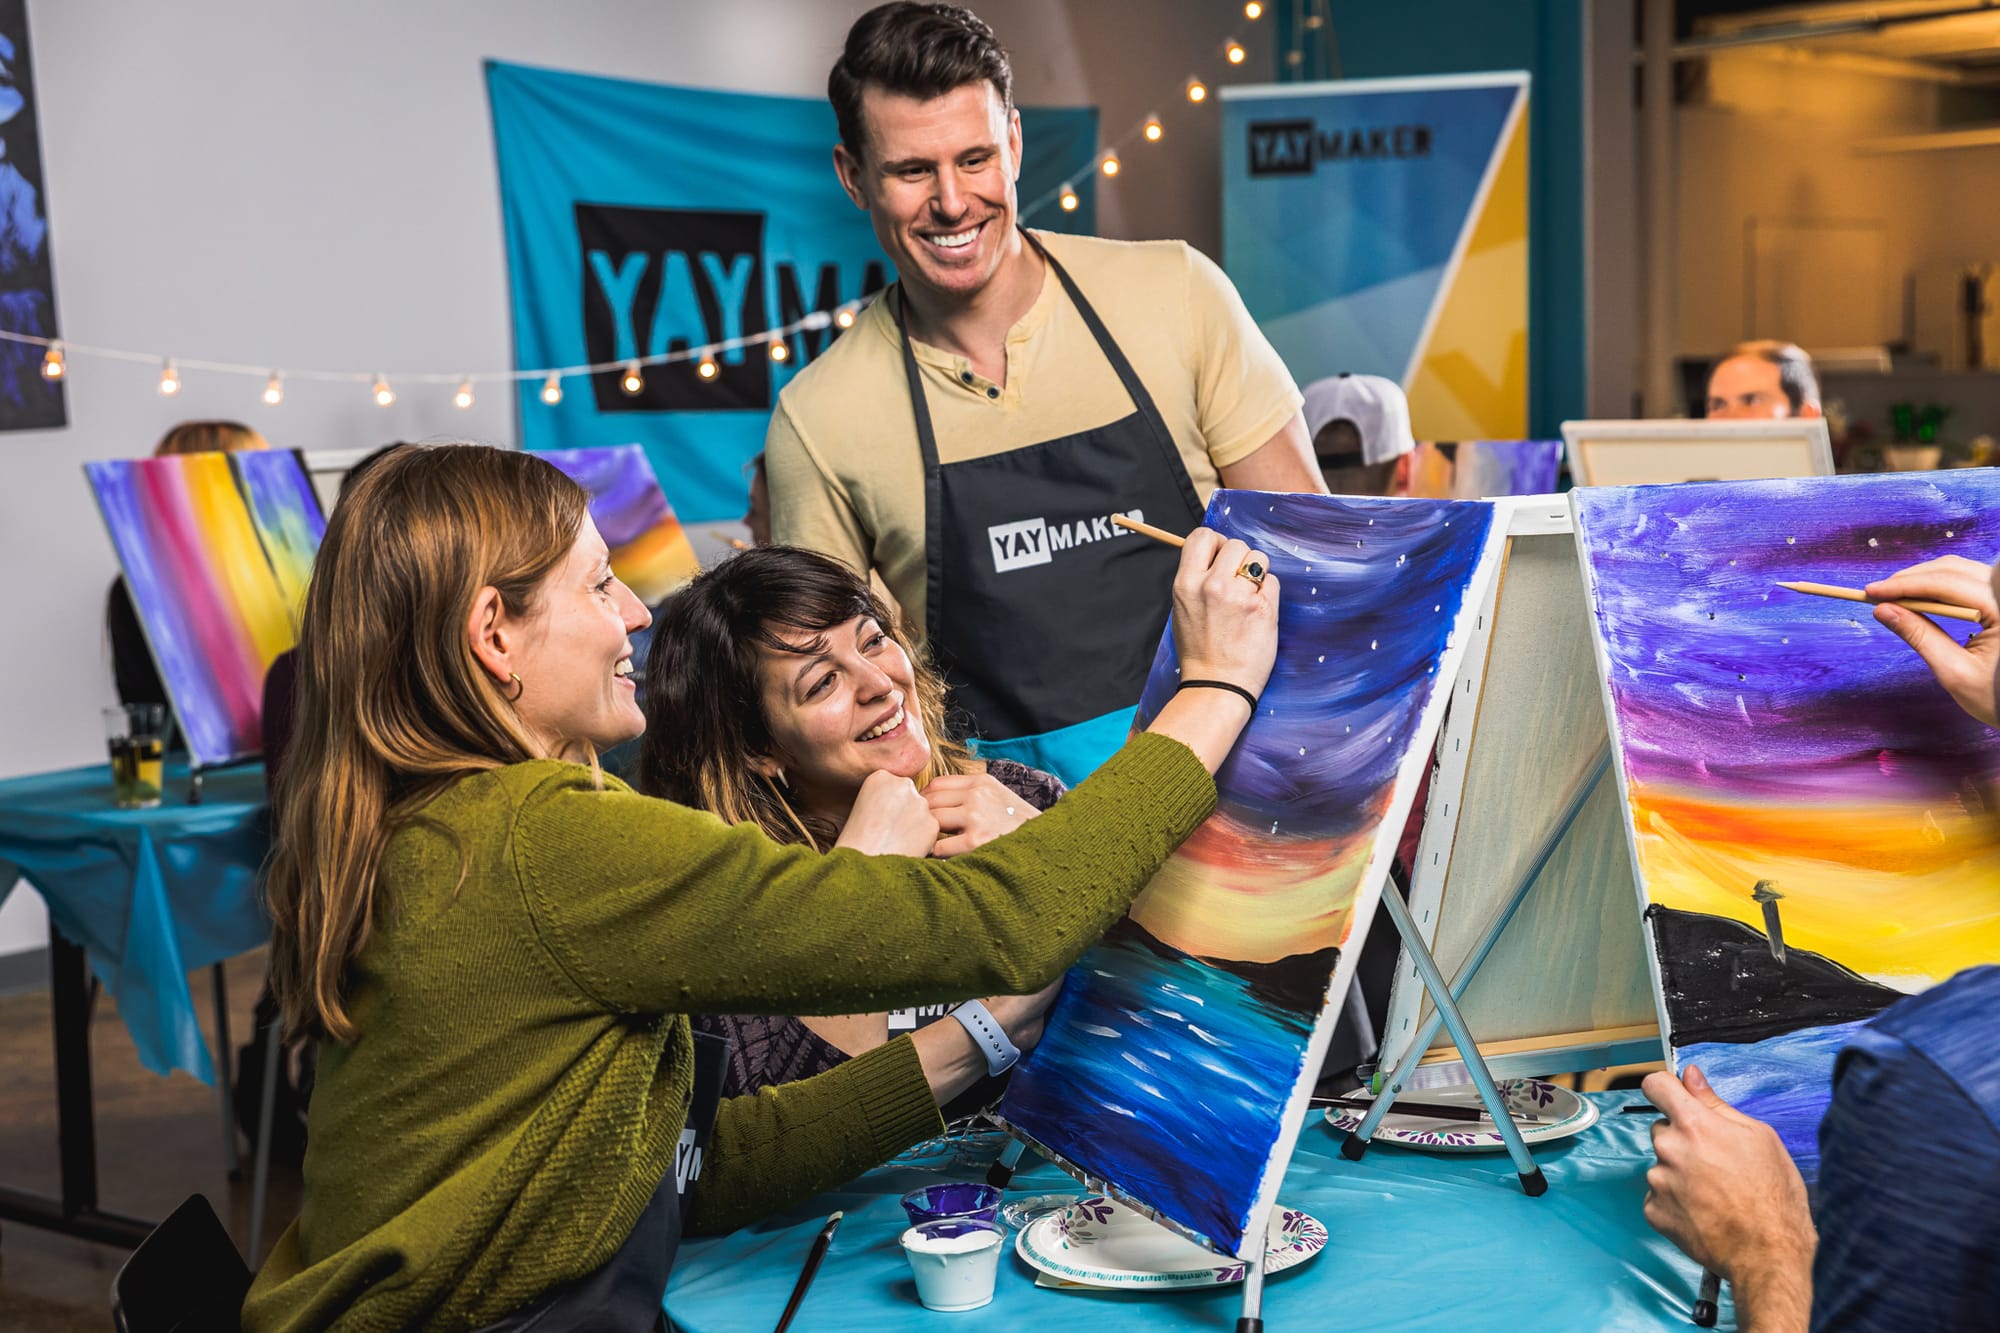 Colleagues painting at Yaymaker Paint Nite event with host